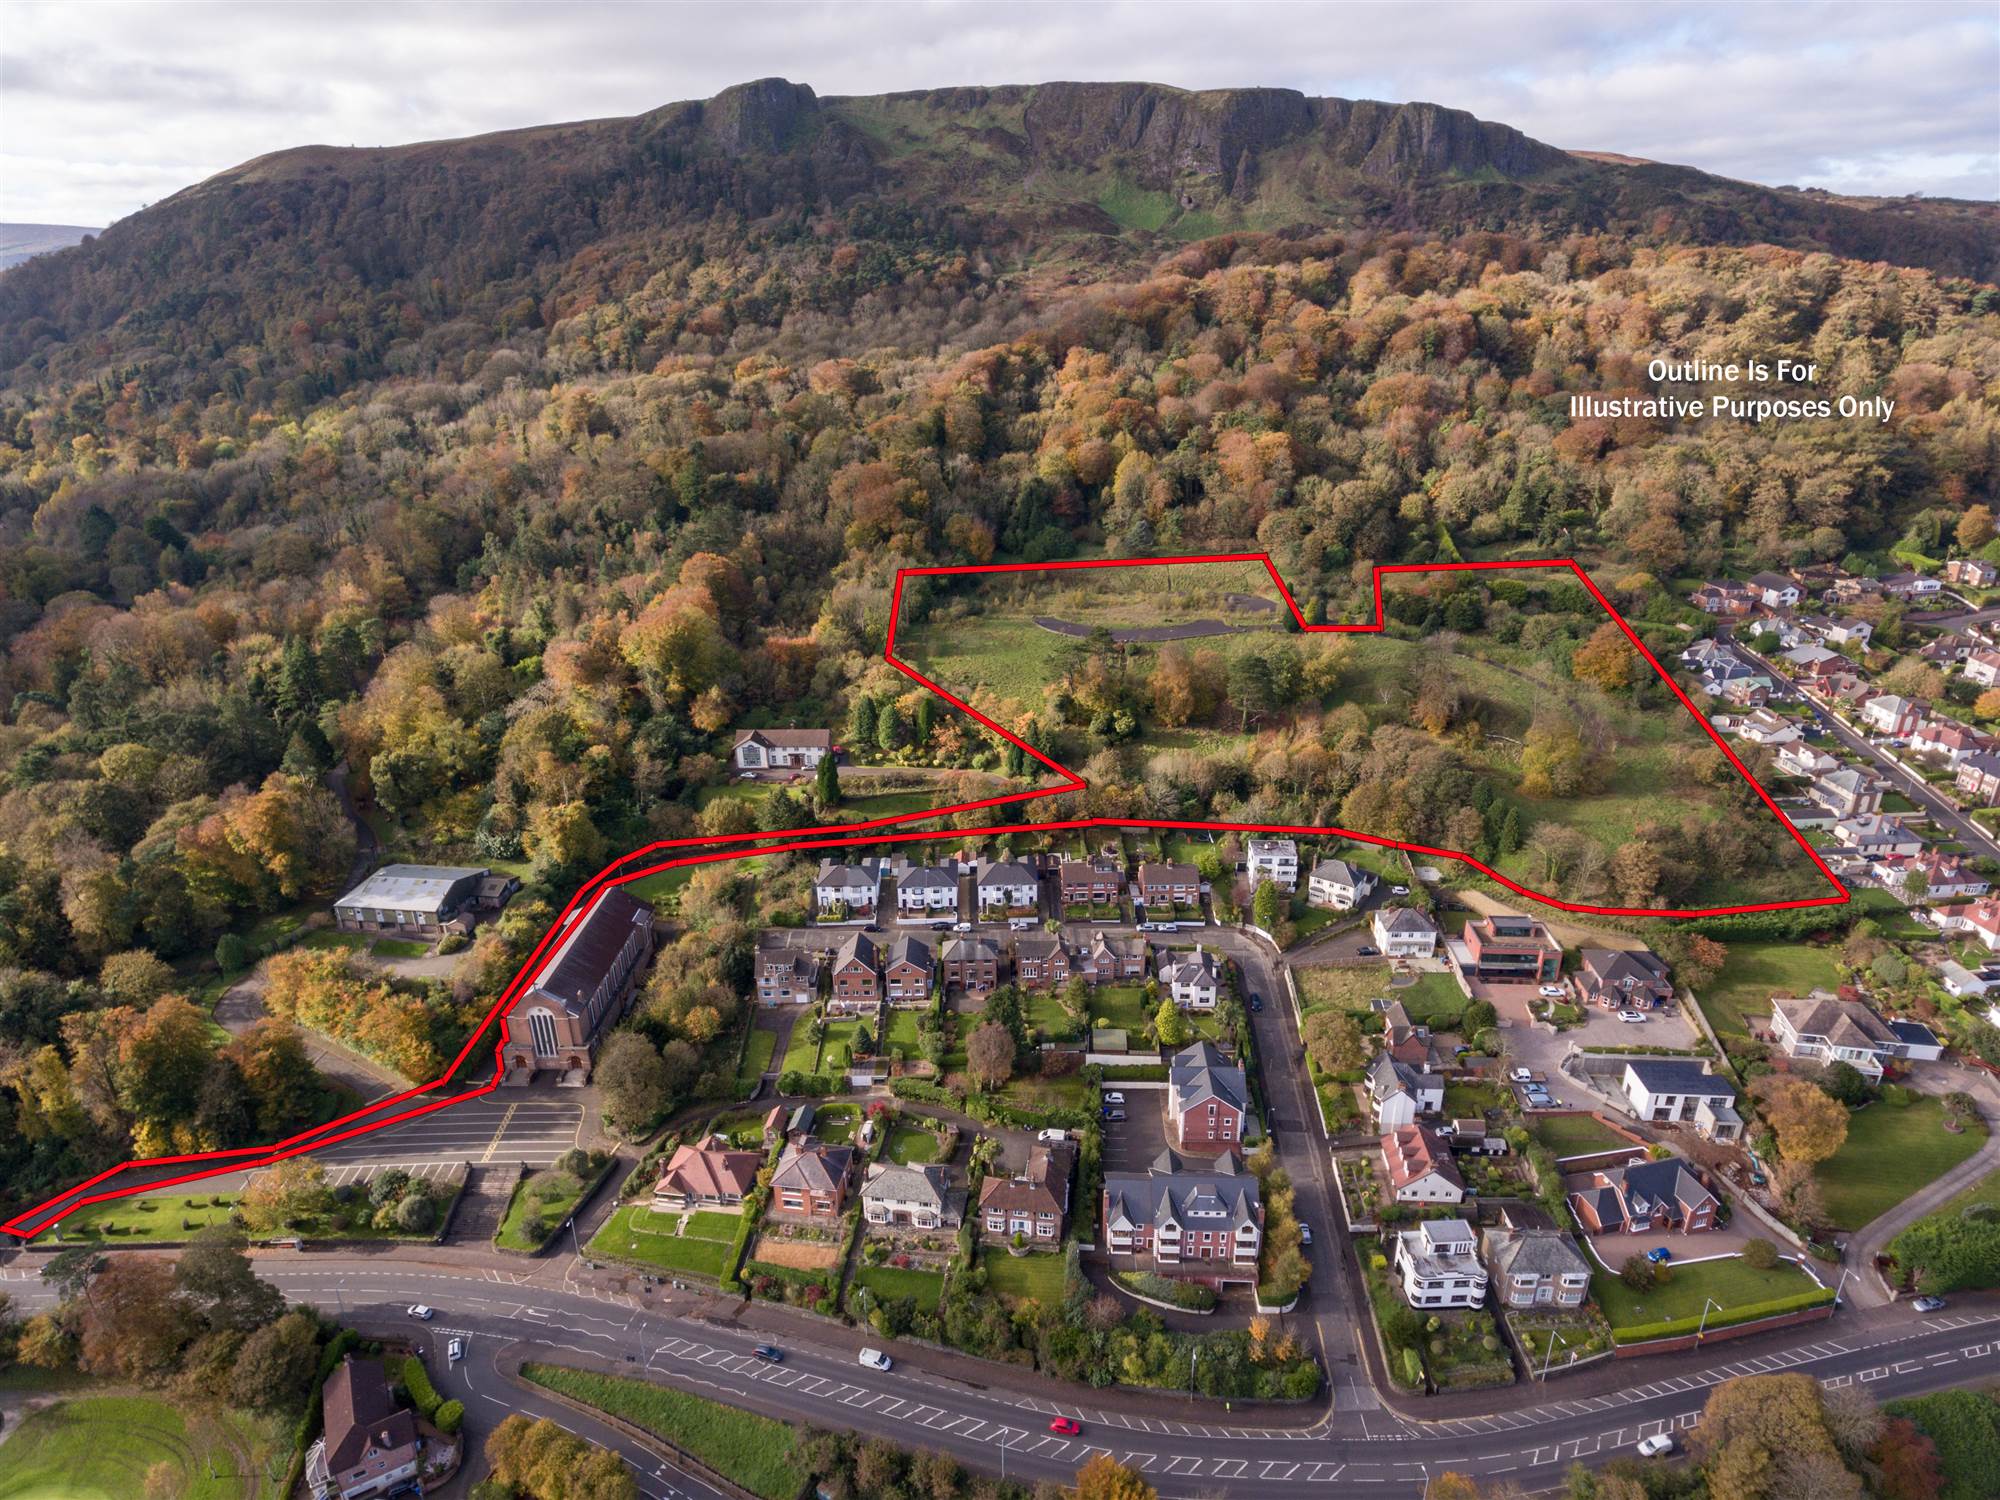 Prime Residential Development Site Lands At The Former St. Clements Retreat